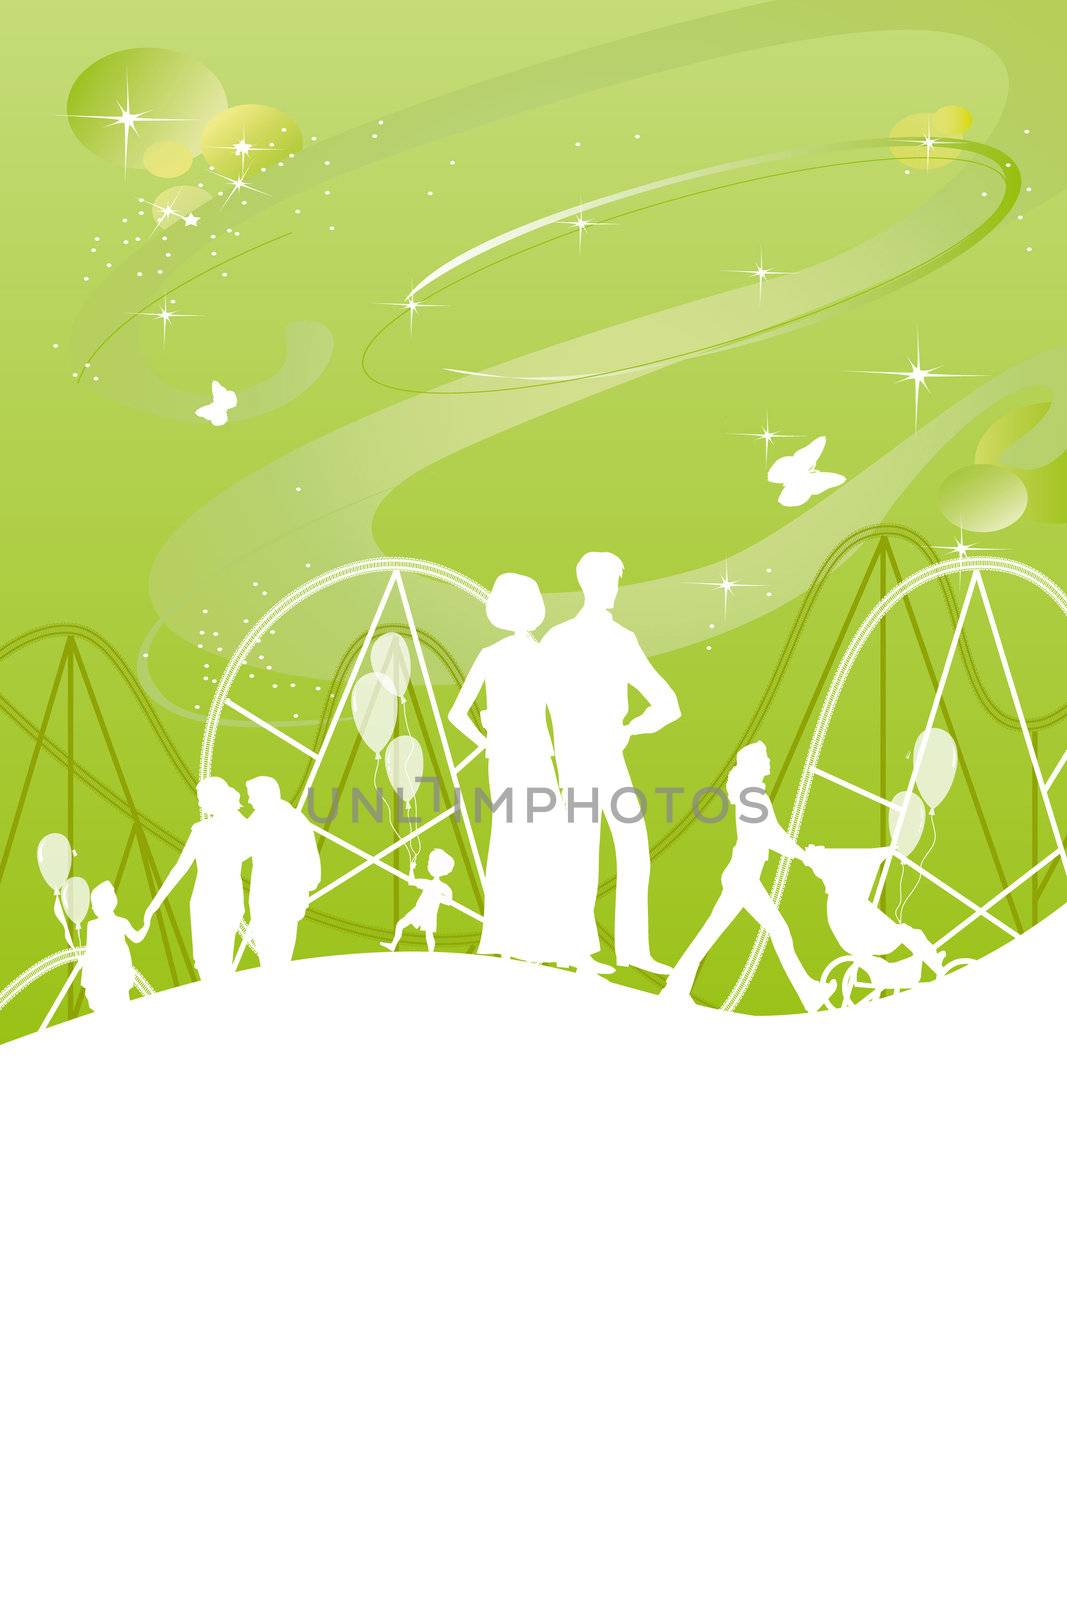 drawing of a theme park with rides and festivities for families with children playing ball near a big 8